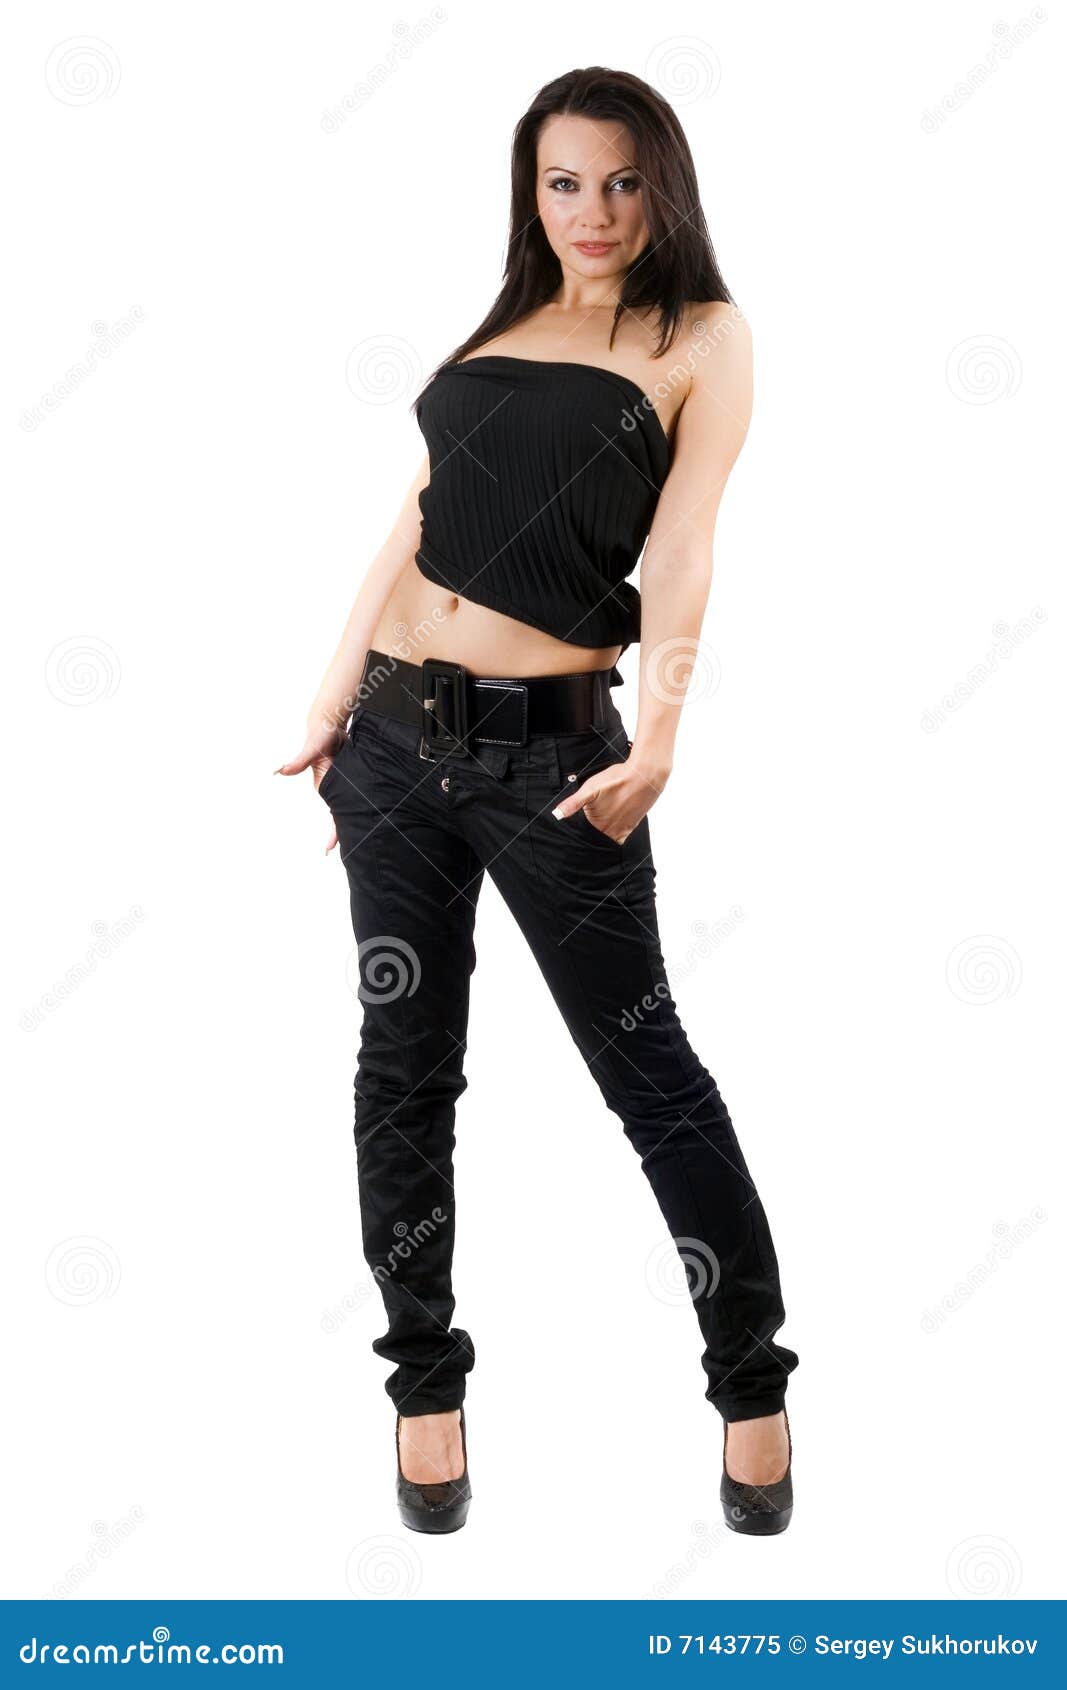 The Young Woman in a Black Jeans Stock Image - Image of caucasian ...